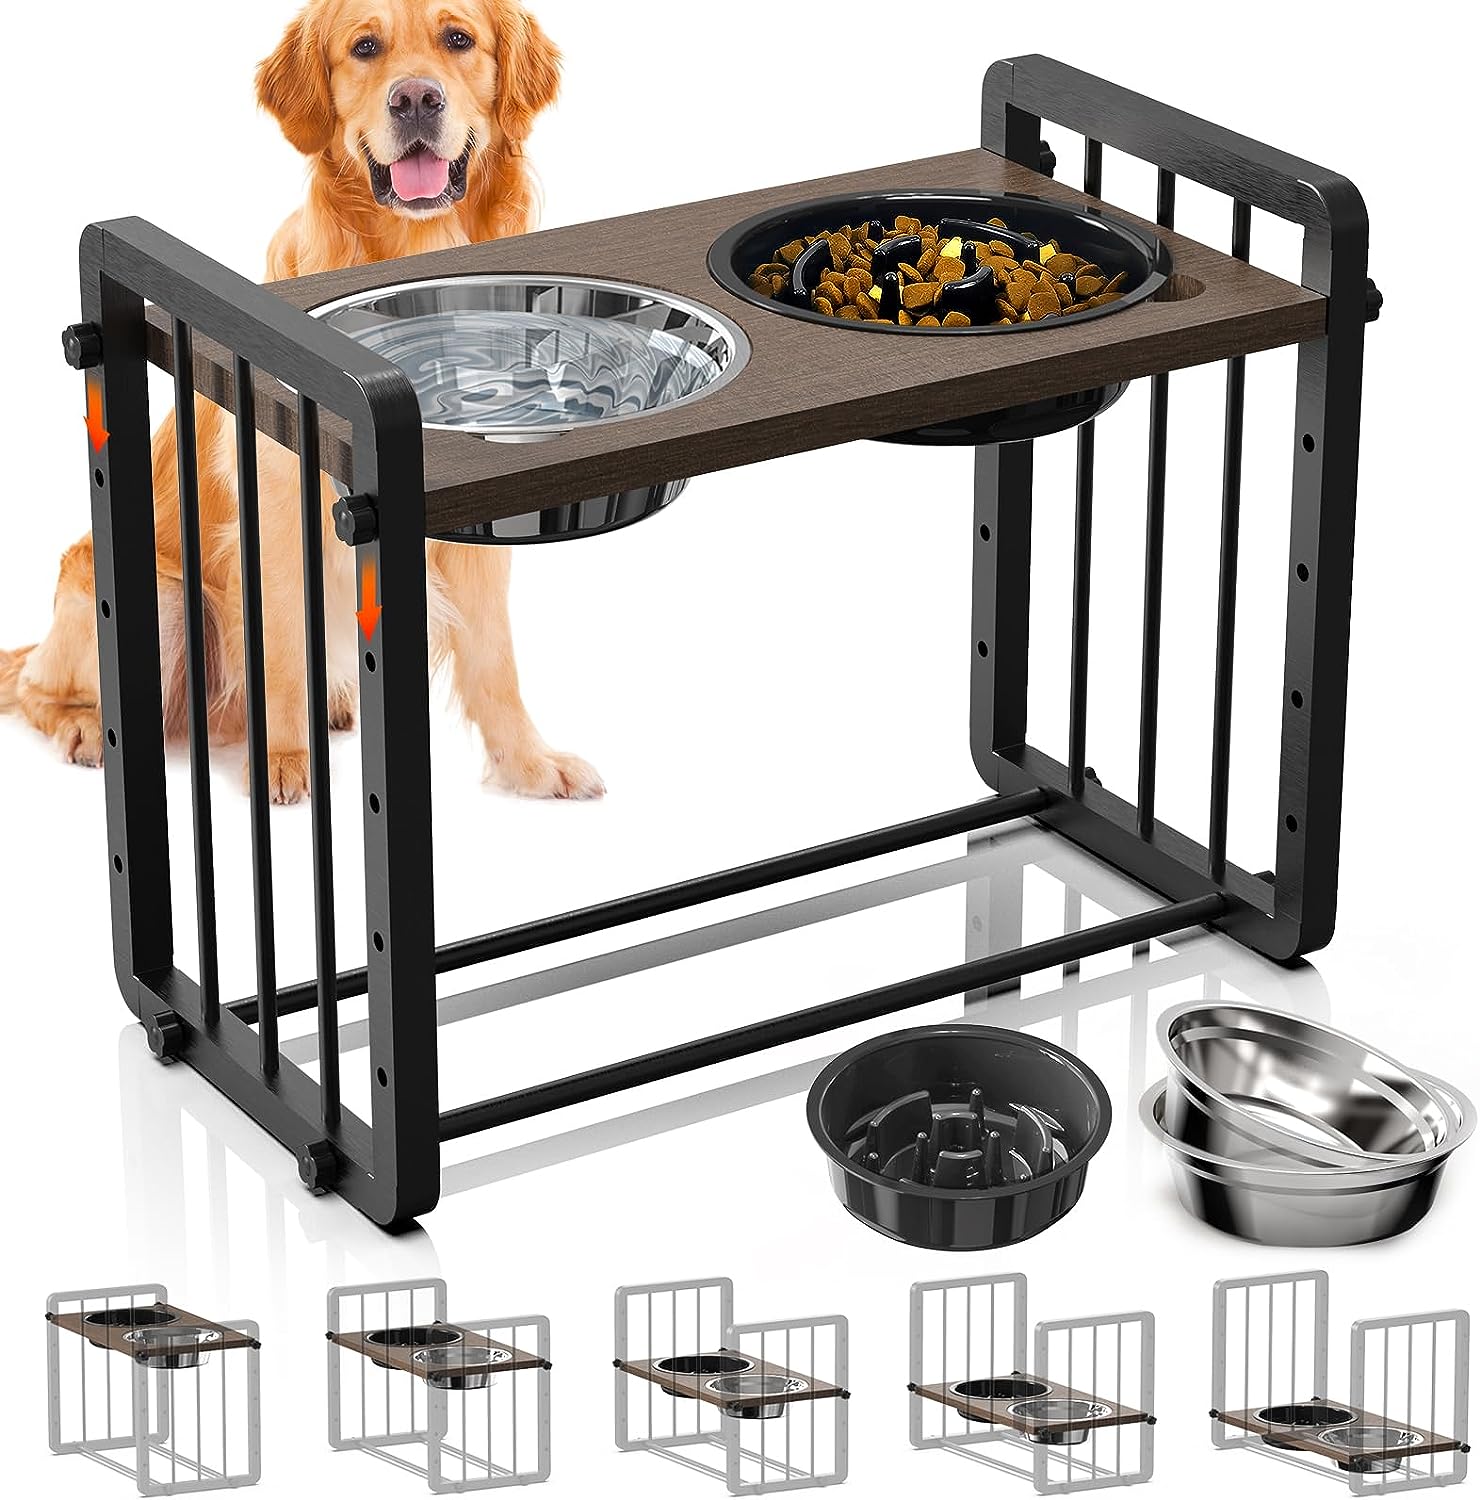 PROERR Single Dog Bowl Stand,Tall Dog Food Stand Adjustable Wide 7-11  Heights 14.5,Metal Elevated Dog Bowl Holder Raised Water Feeder for